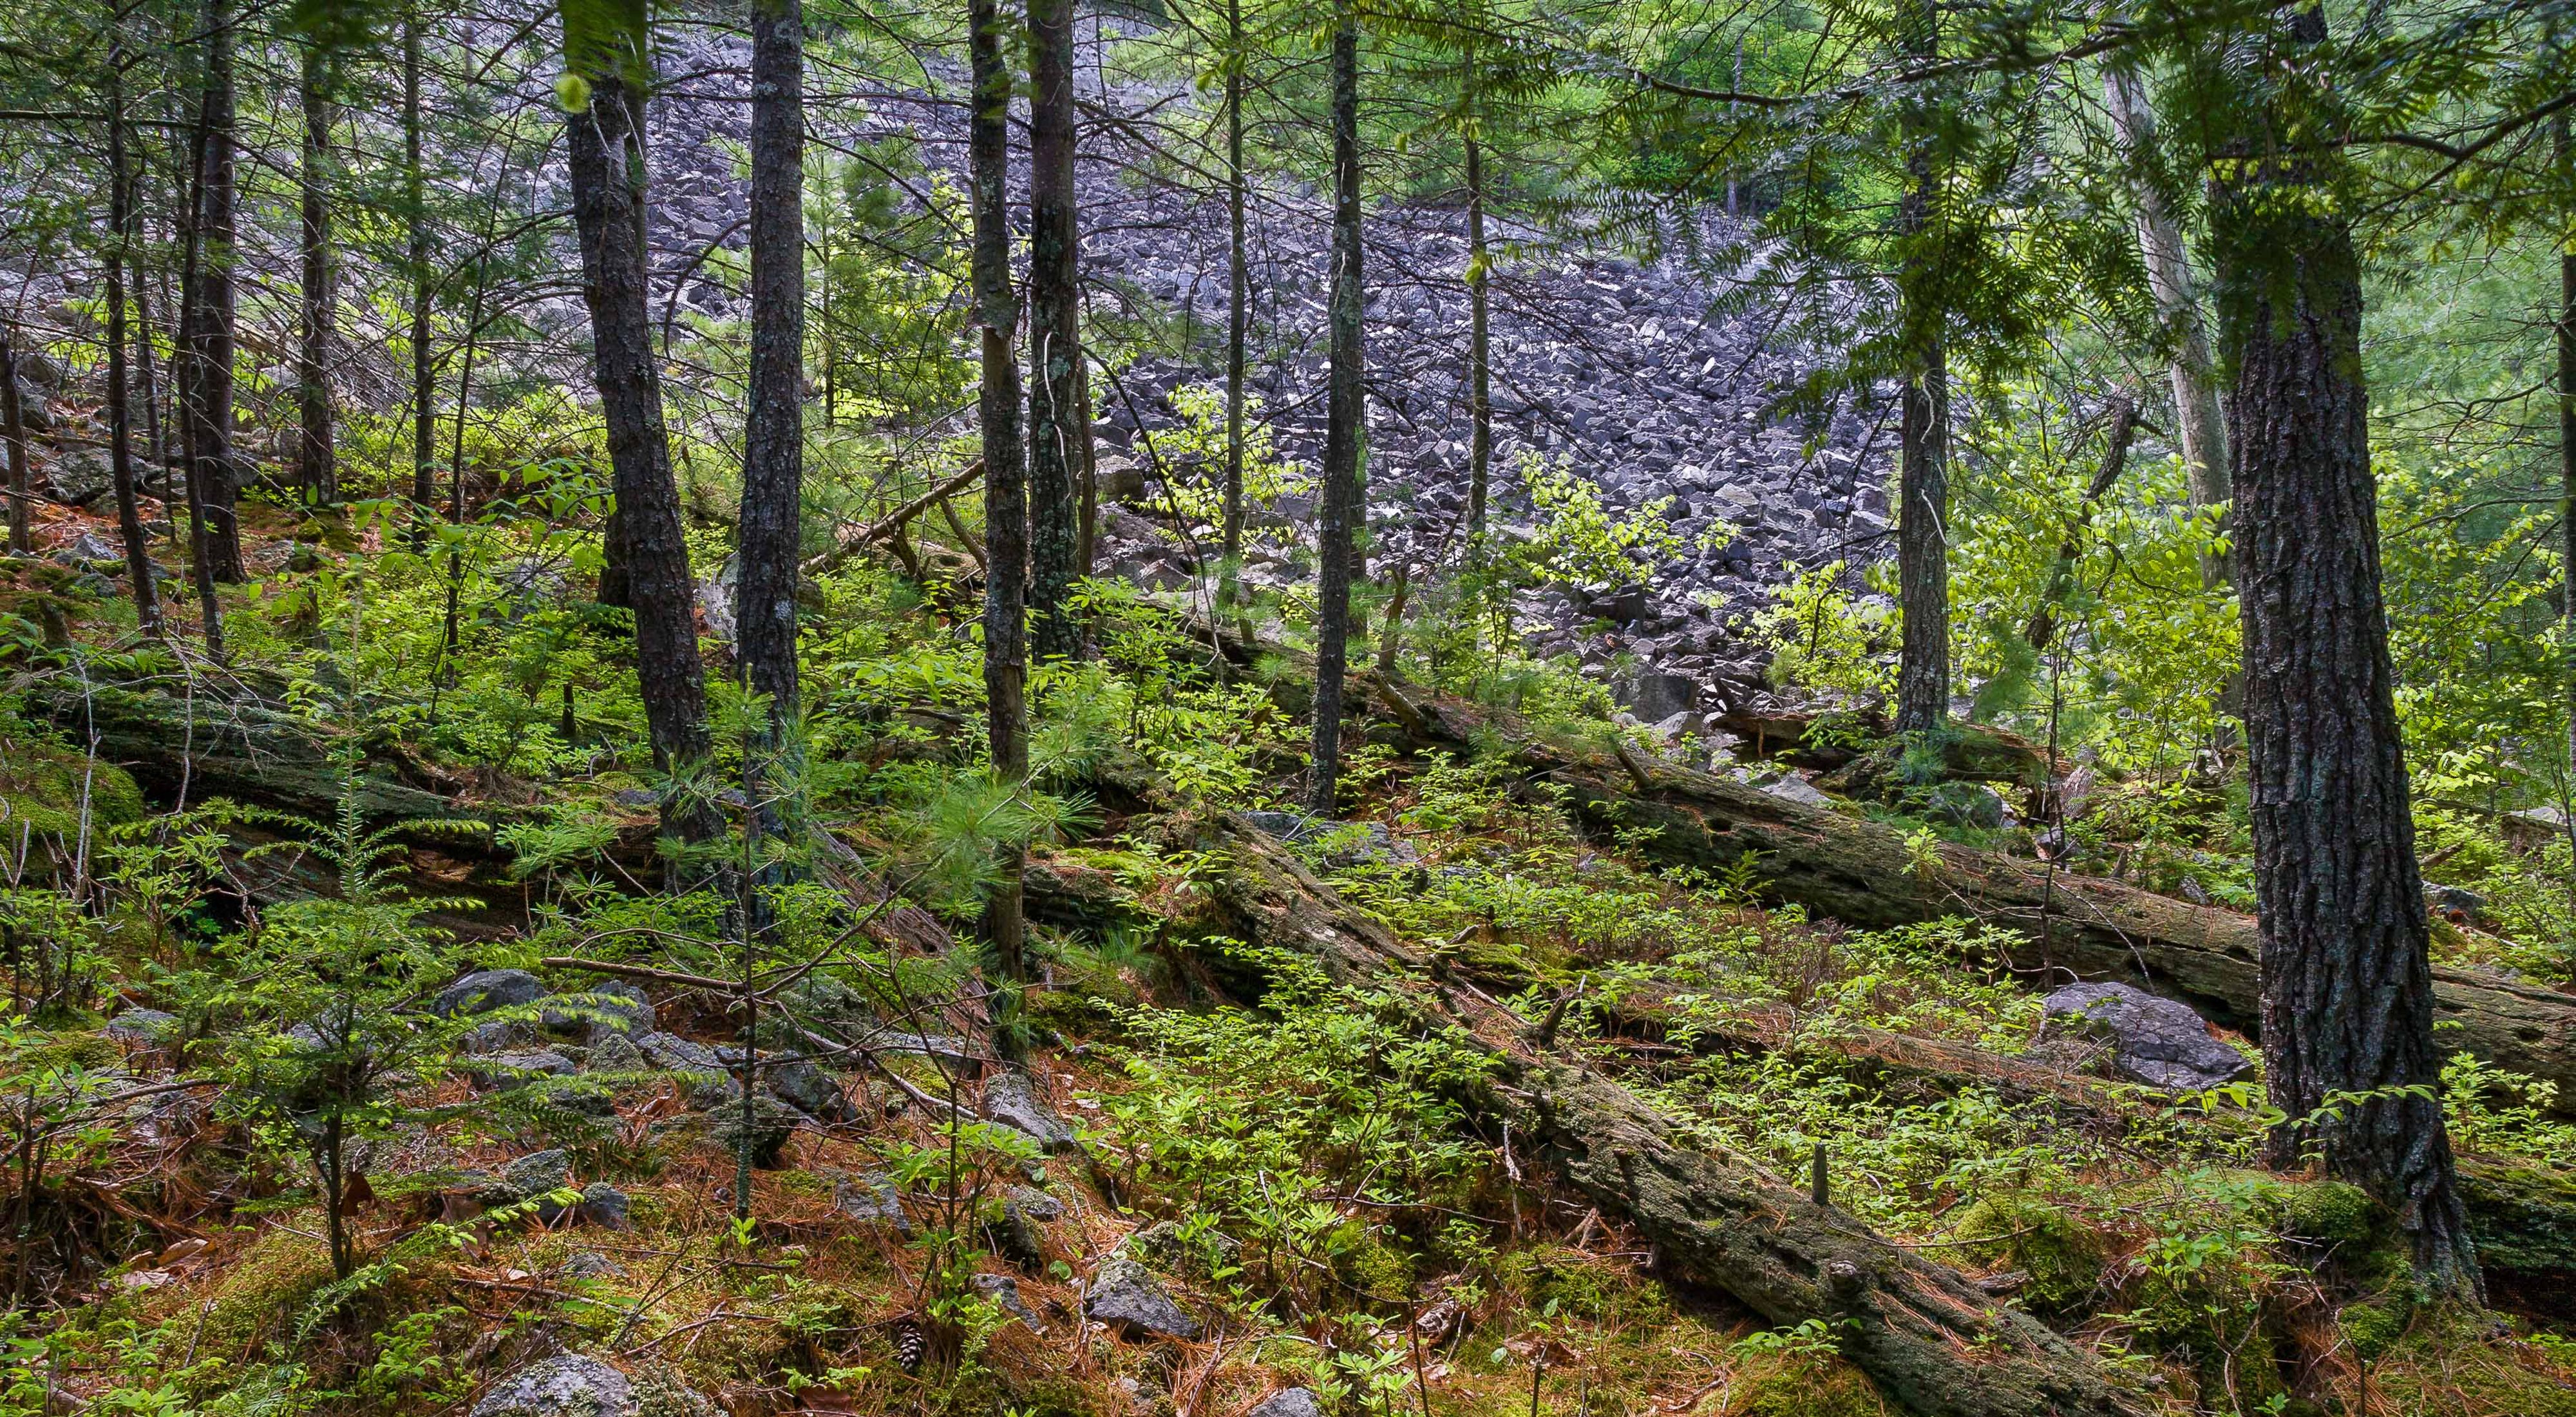 View of a large rockslide area in the midst of a densely wooded forest.